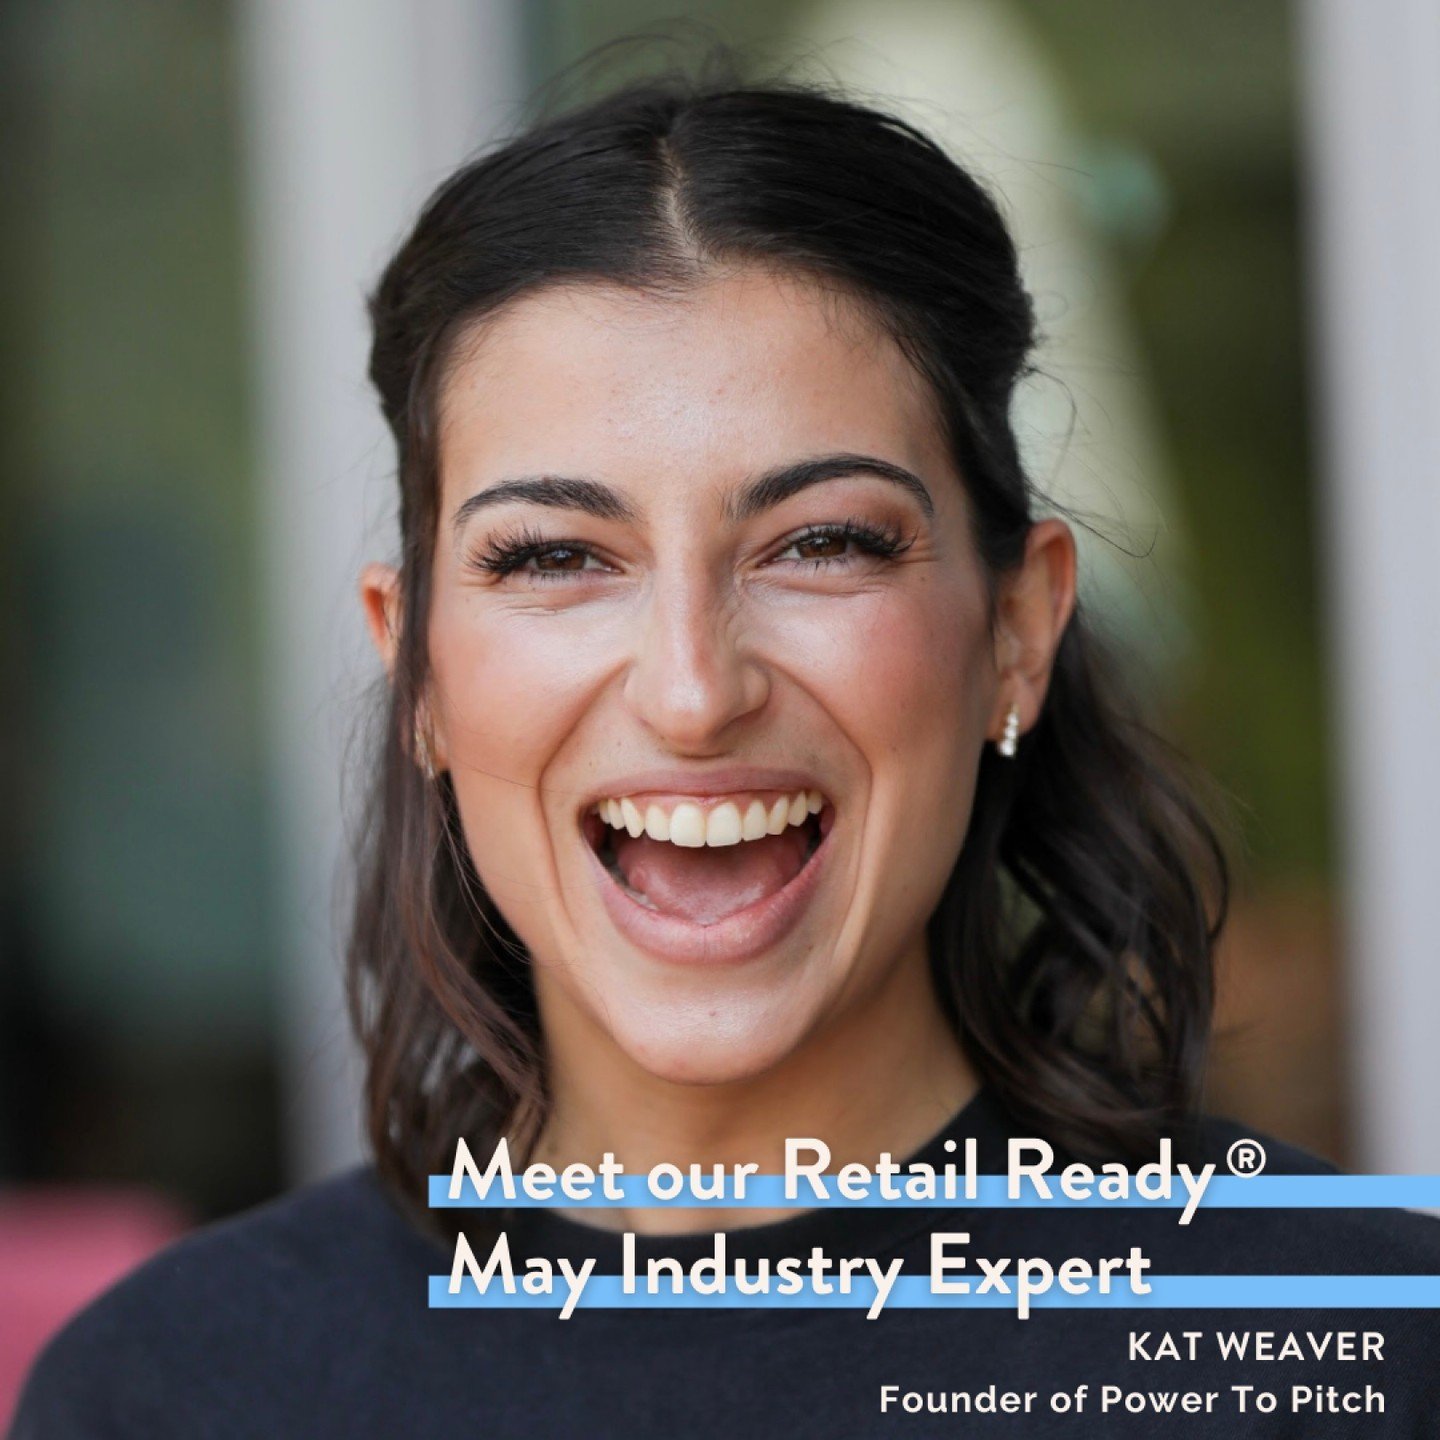 On Wednesday, May 15th, Kat Weaver will be back as our May 2024 Industry Expert!

Kat was able to scale and sell her first company she started out of her college dorm room. After winning 22 of 23 pitches she entered, she founded Power To Pitch - @pow